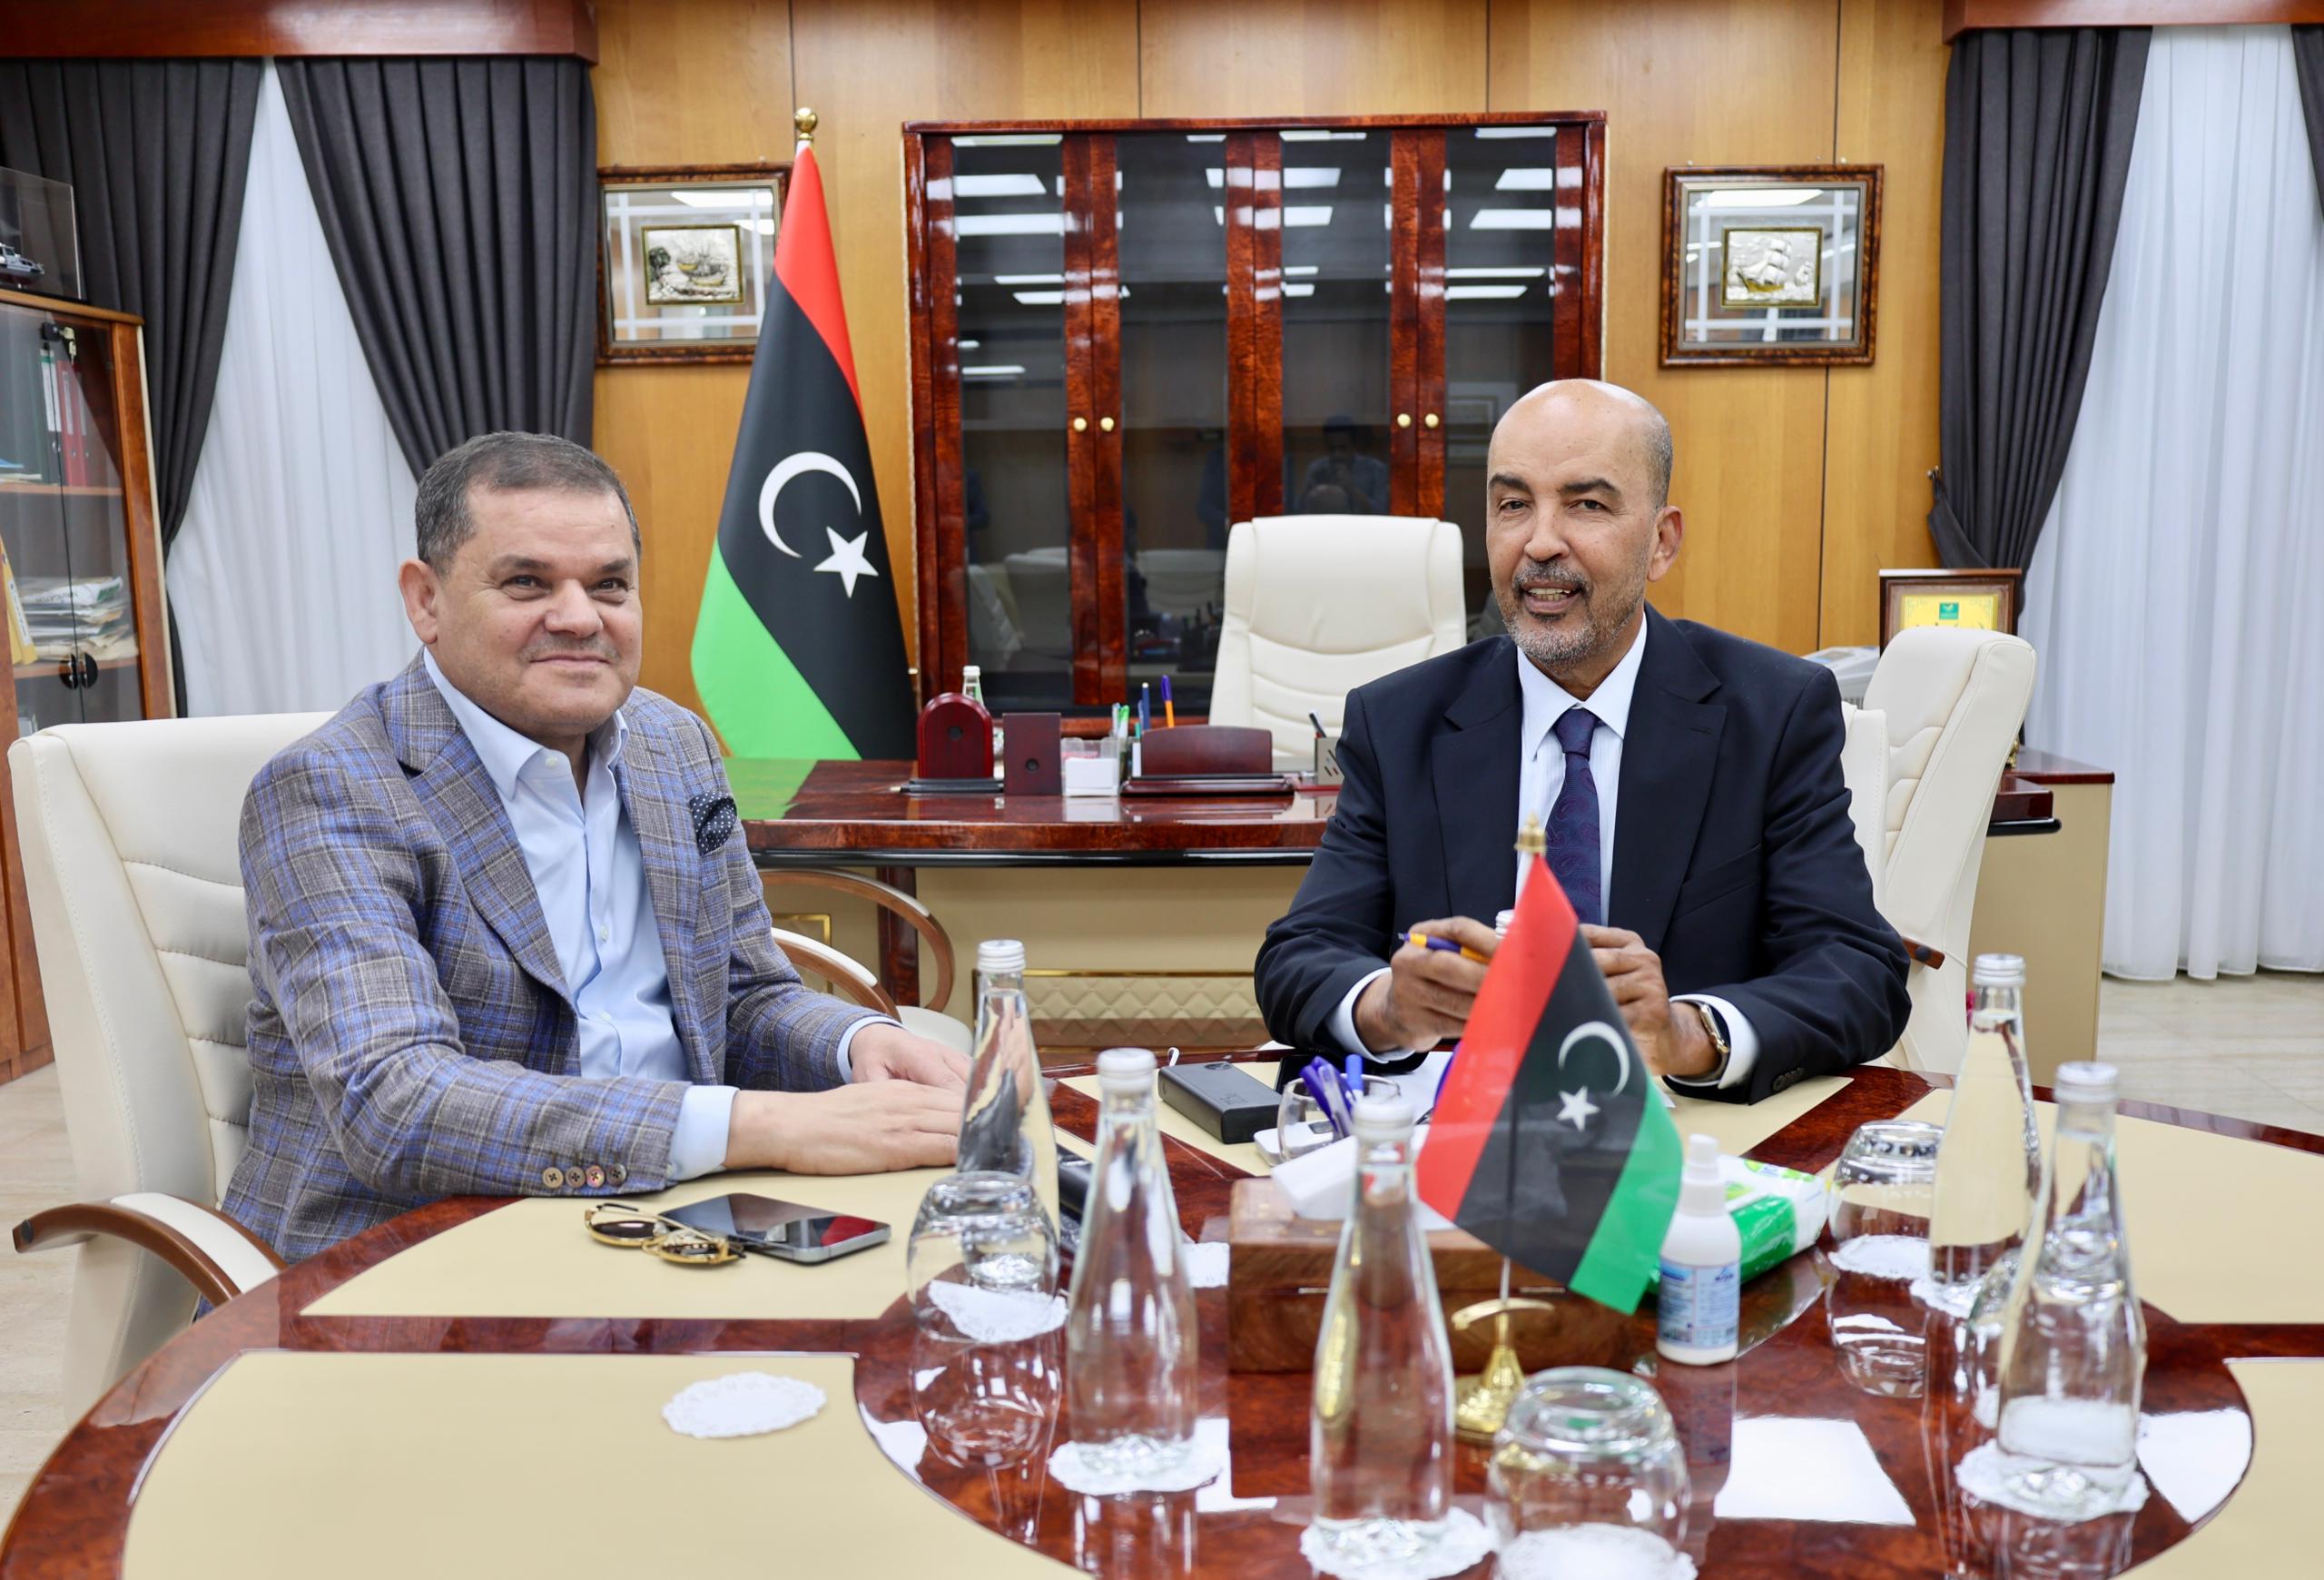 Al-Koni discusses with Al-Dabaiba the implementation of strategic projects in the southern regions